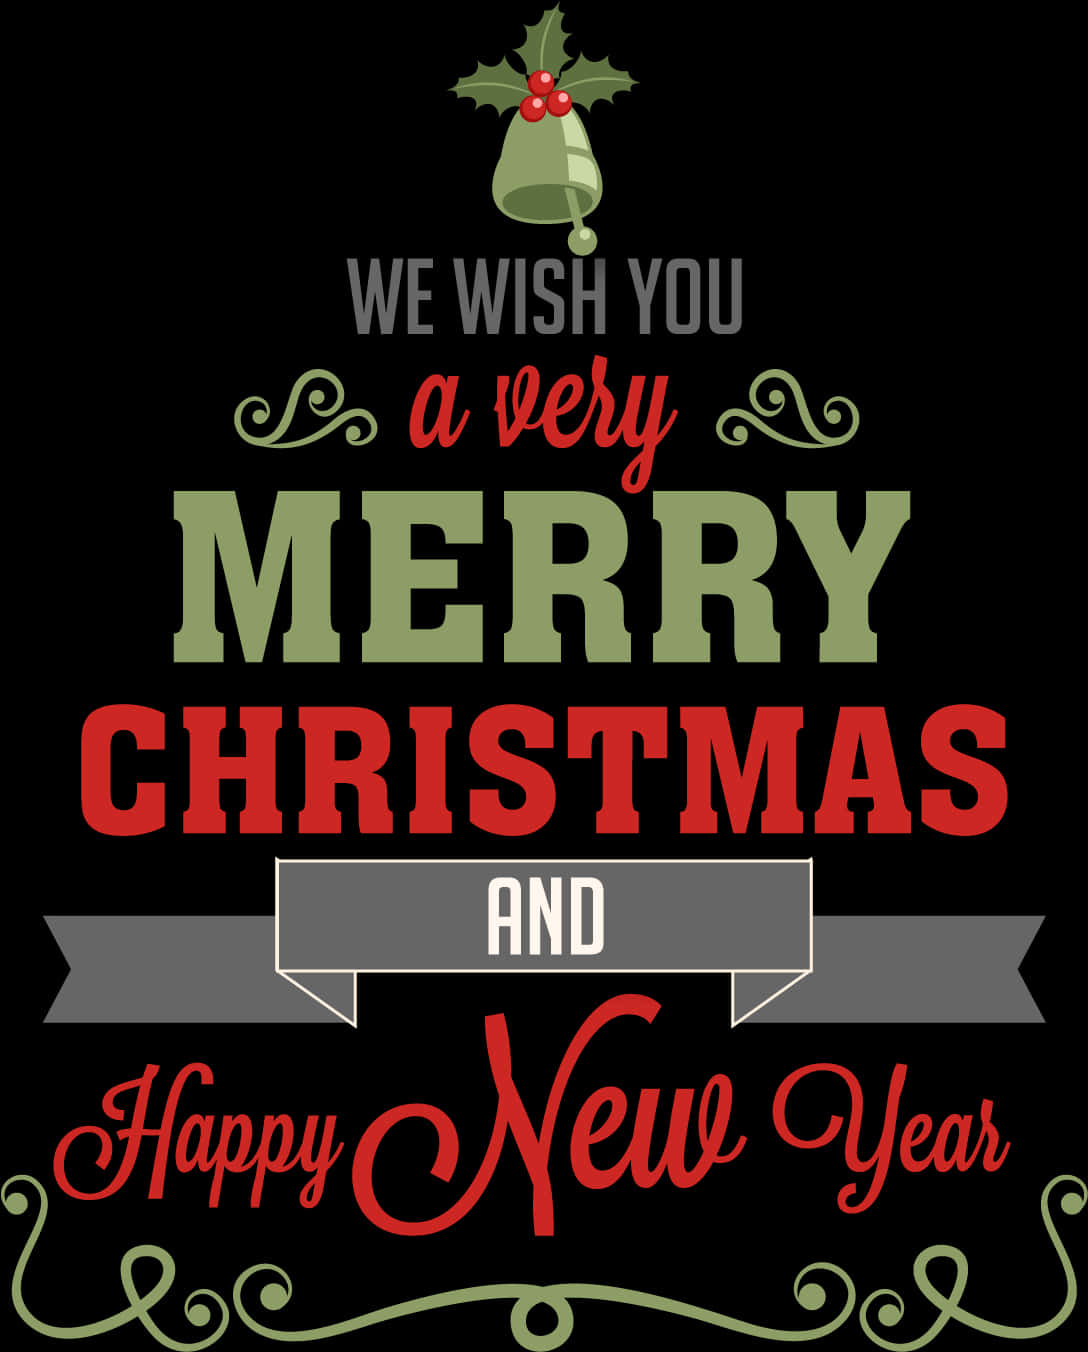 Merry Christmasand Happy New Year Greeting PNG